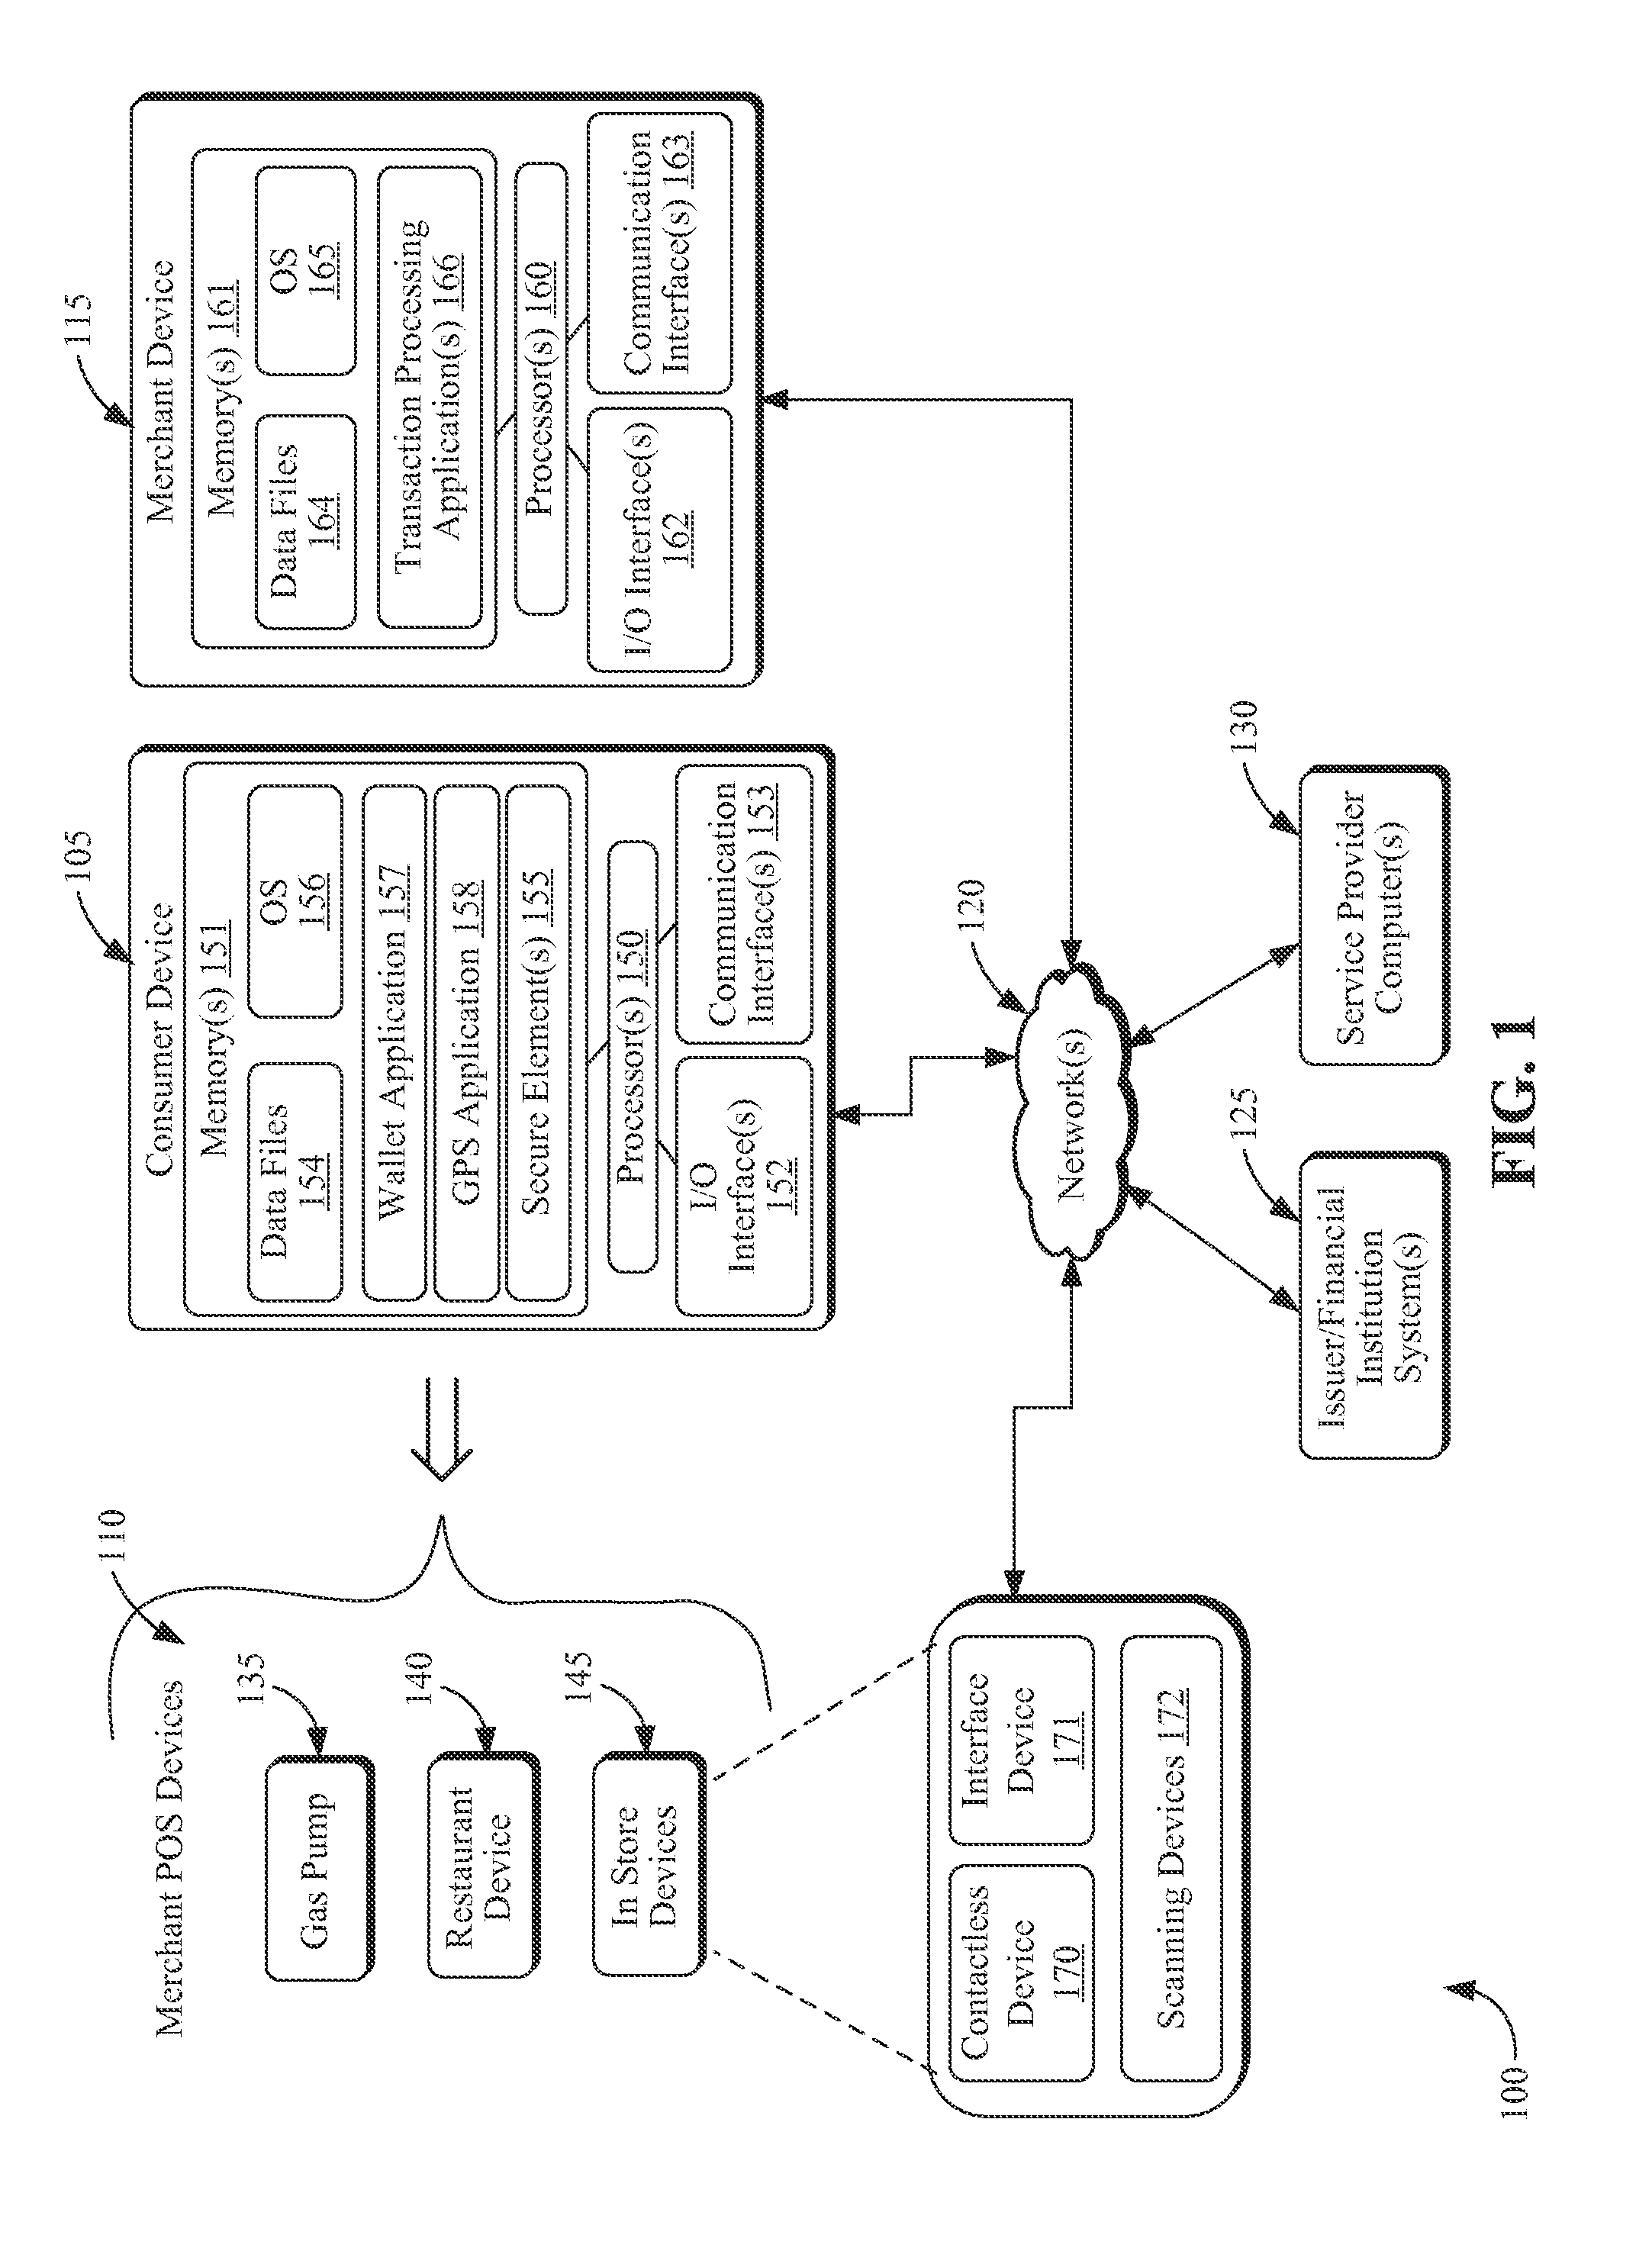 Systems and Methods for Facilitating Point of Sale Transactions